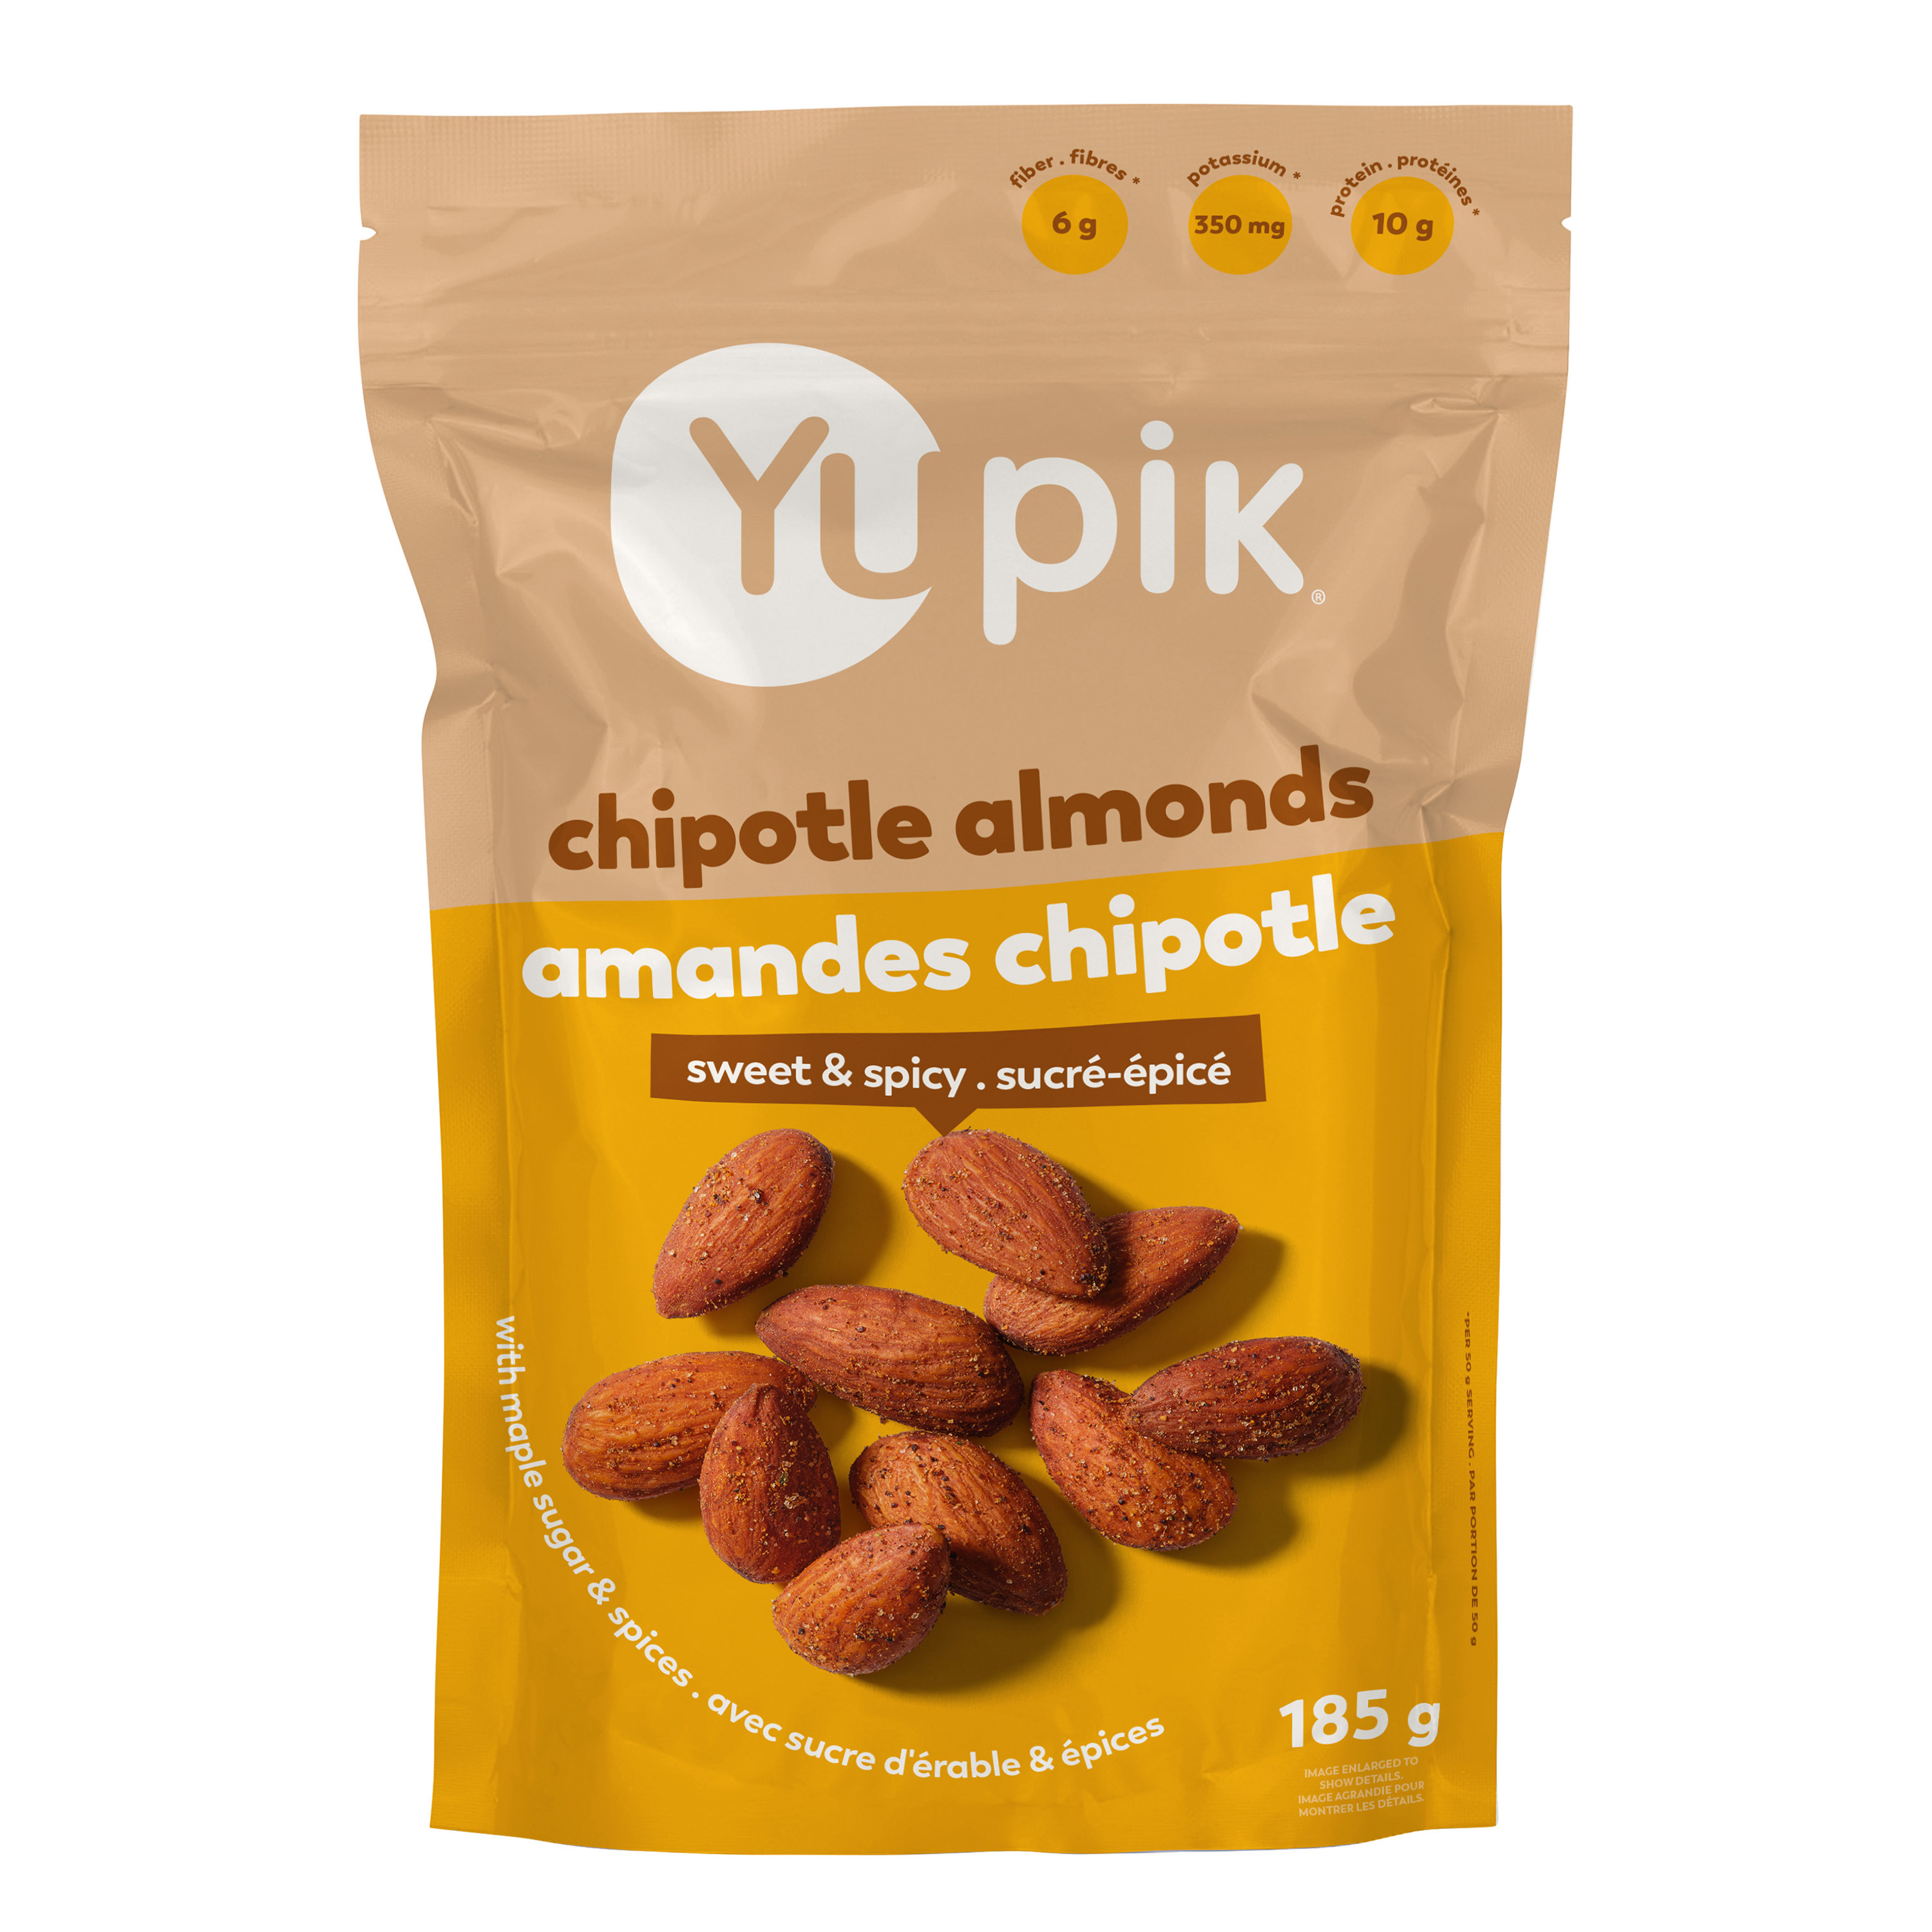 Almonds, Maple chipotle seasoning [spices, herbs, sugar, maple sugar, maltodextrin, salt, dehydrated vegetables (garlic, onion), smoked dehydrated jalapeno pepper, soy sauce (soybeans, wheat, water, salt) (soy, wheat), dehydrated poblano pepper, canola oil, paprika extract, natural flavour], Organic cane sugar, Sea salt, Organic virgin coconut oil